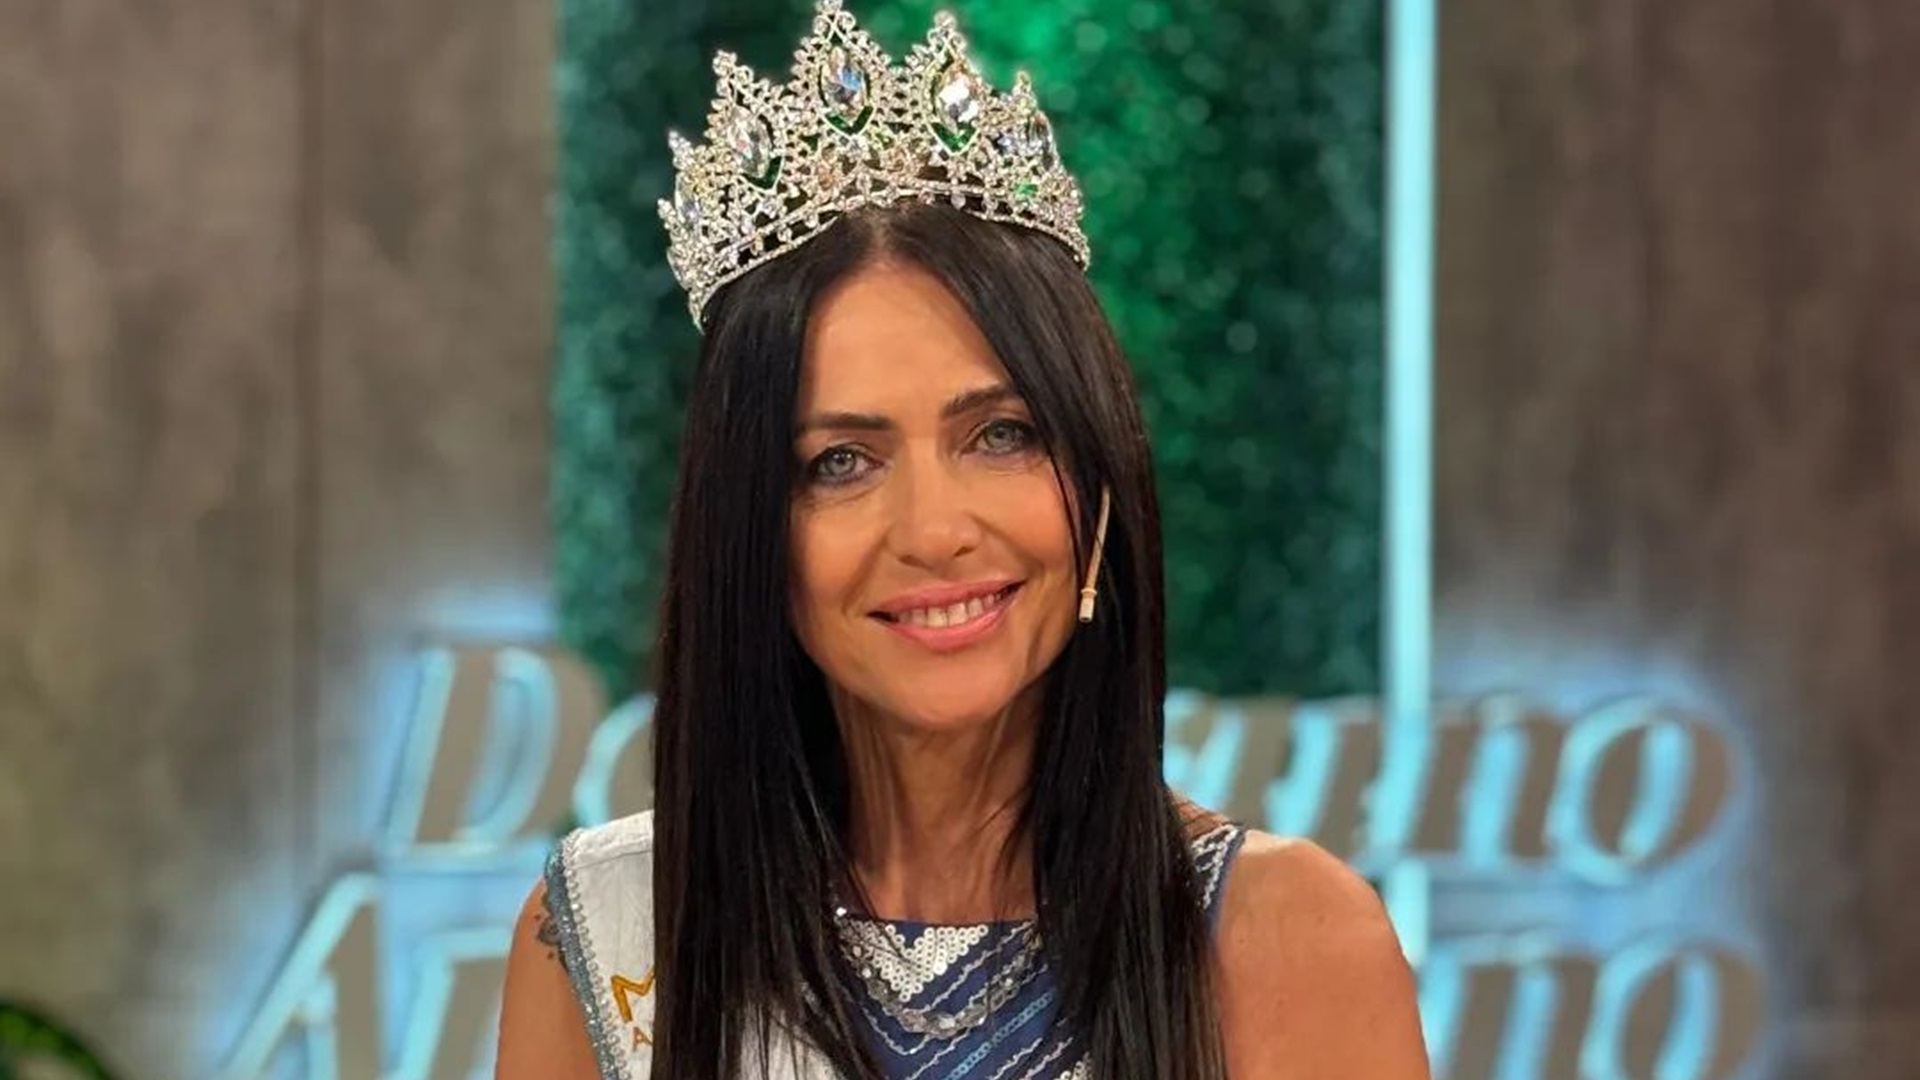 Meet the 60-year-old winner of Miss Universe Buenos Aires